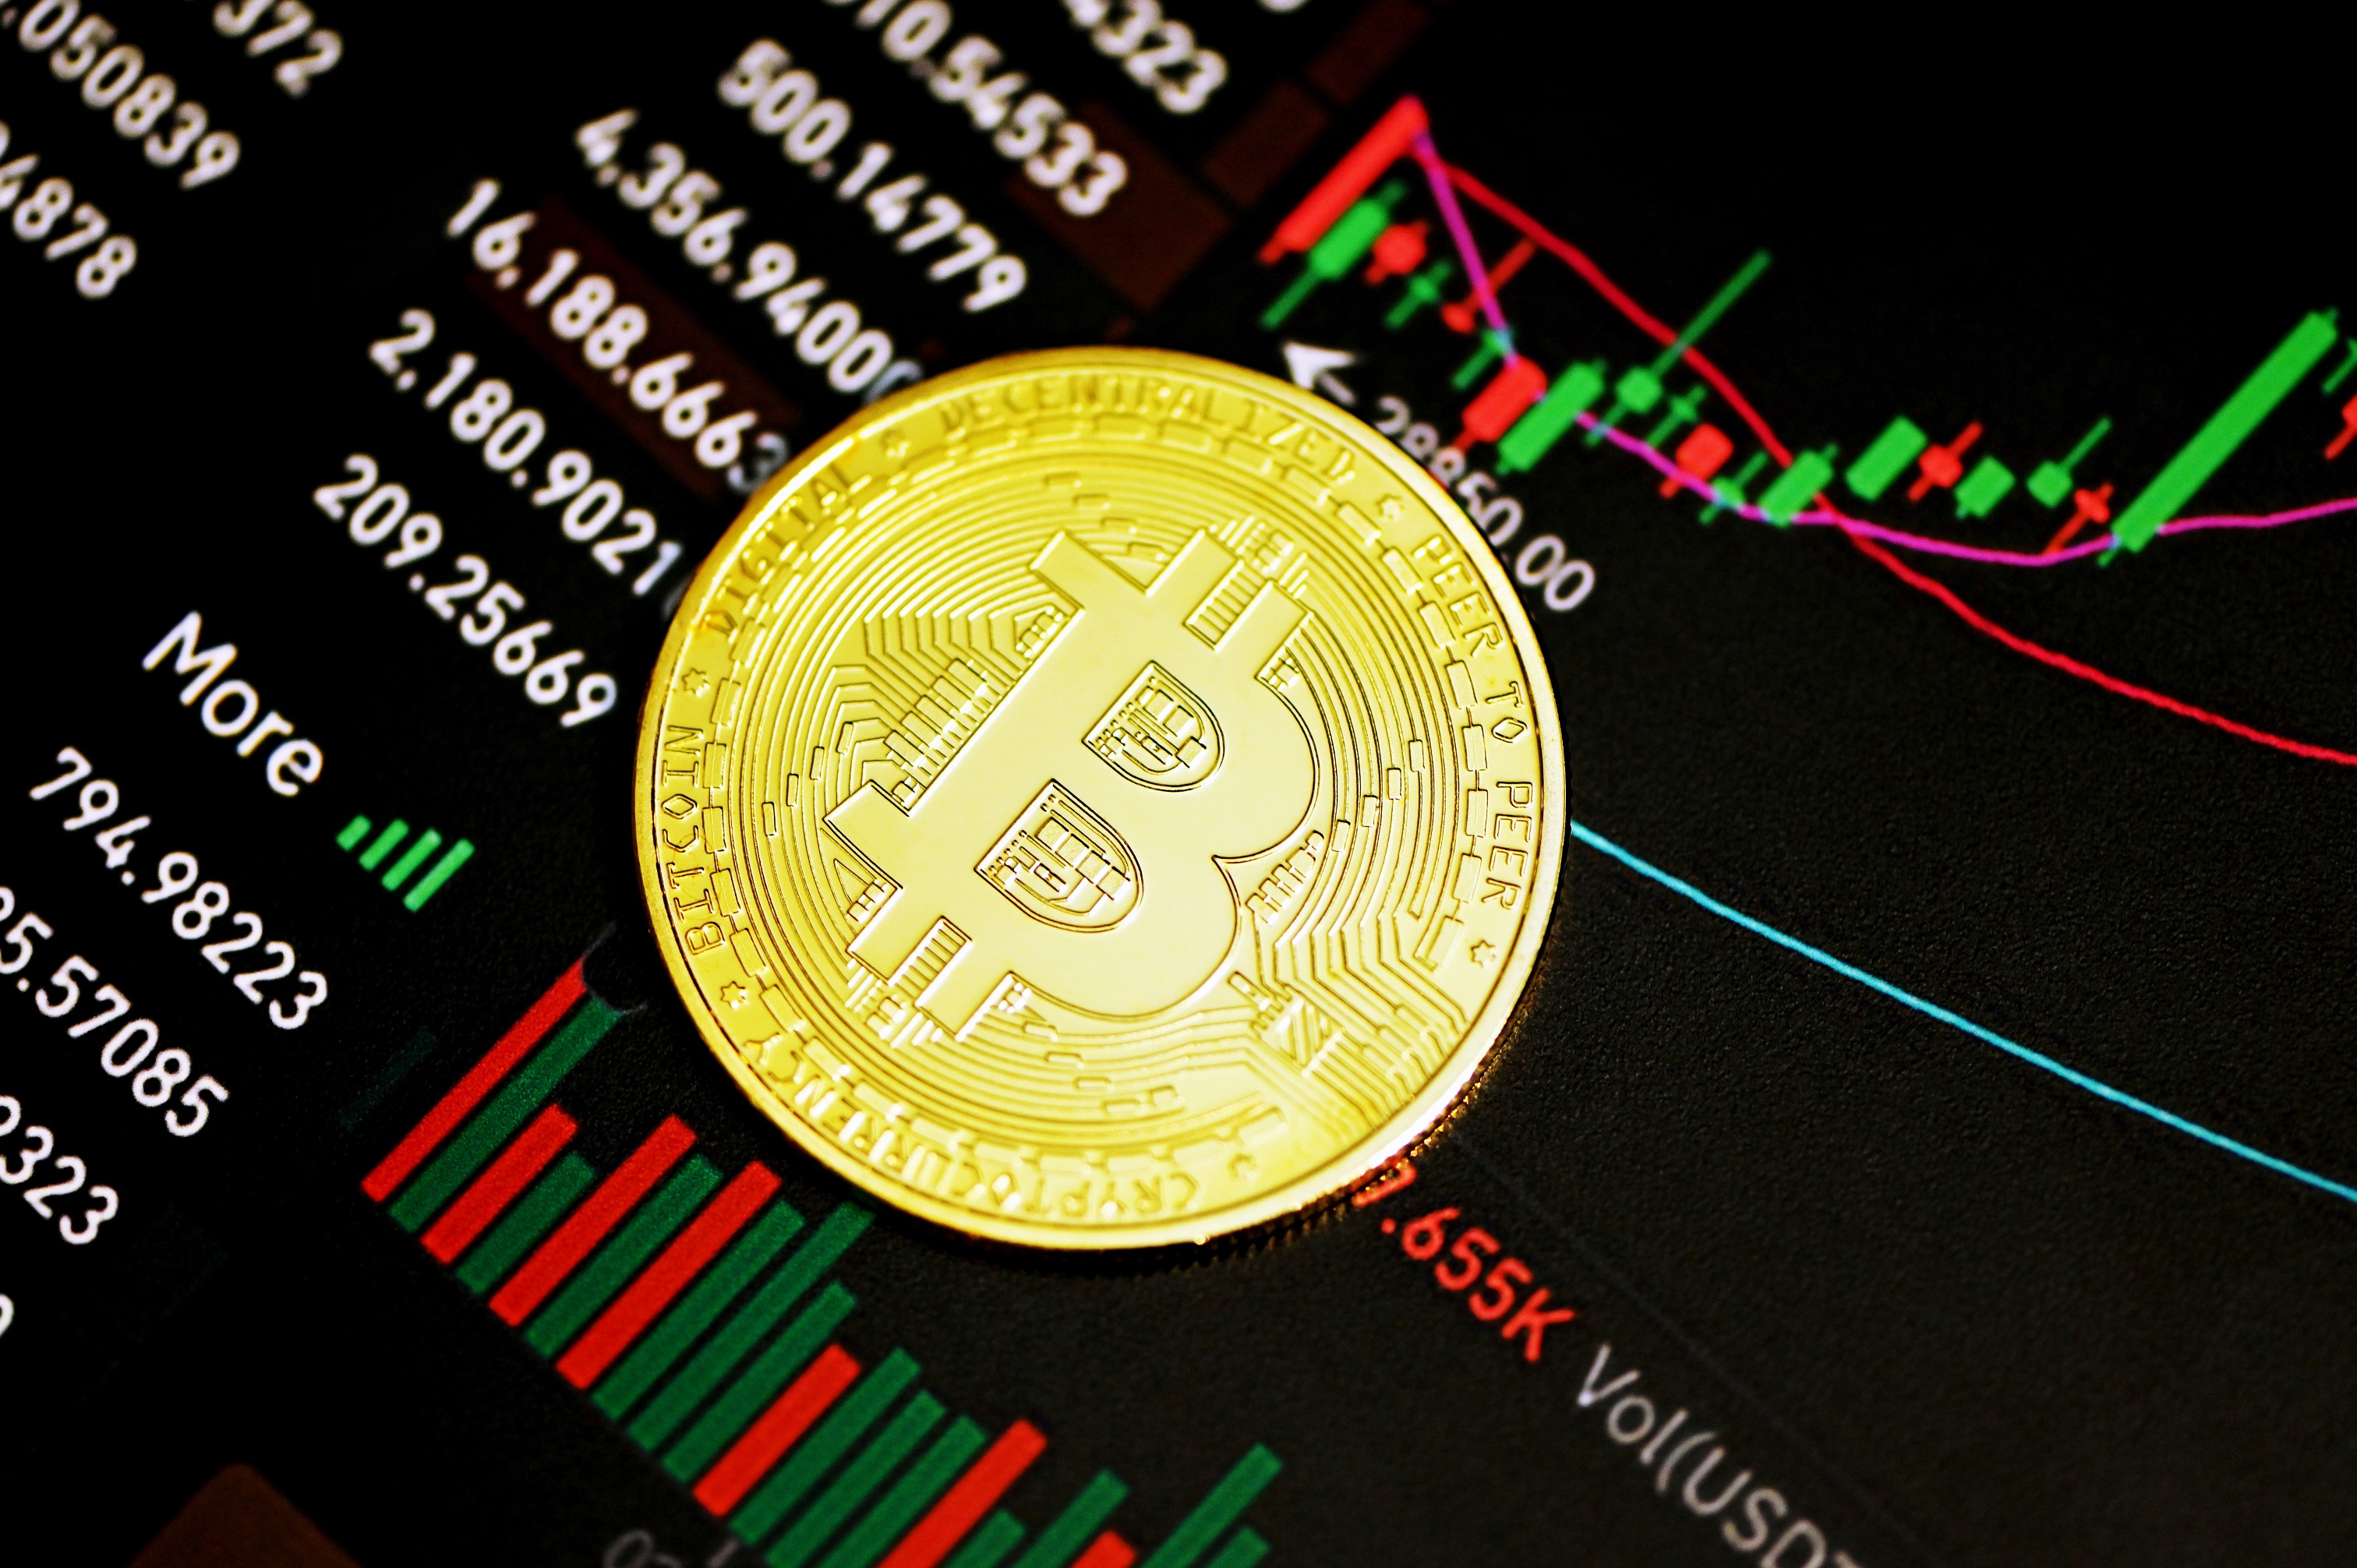 Bitcoin Exceeds Expectations As Inflation Hedge, Data Shows